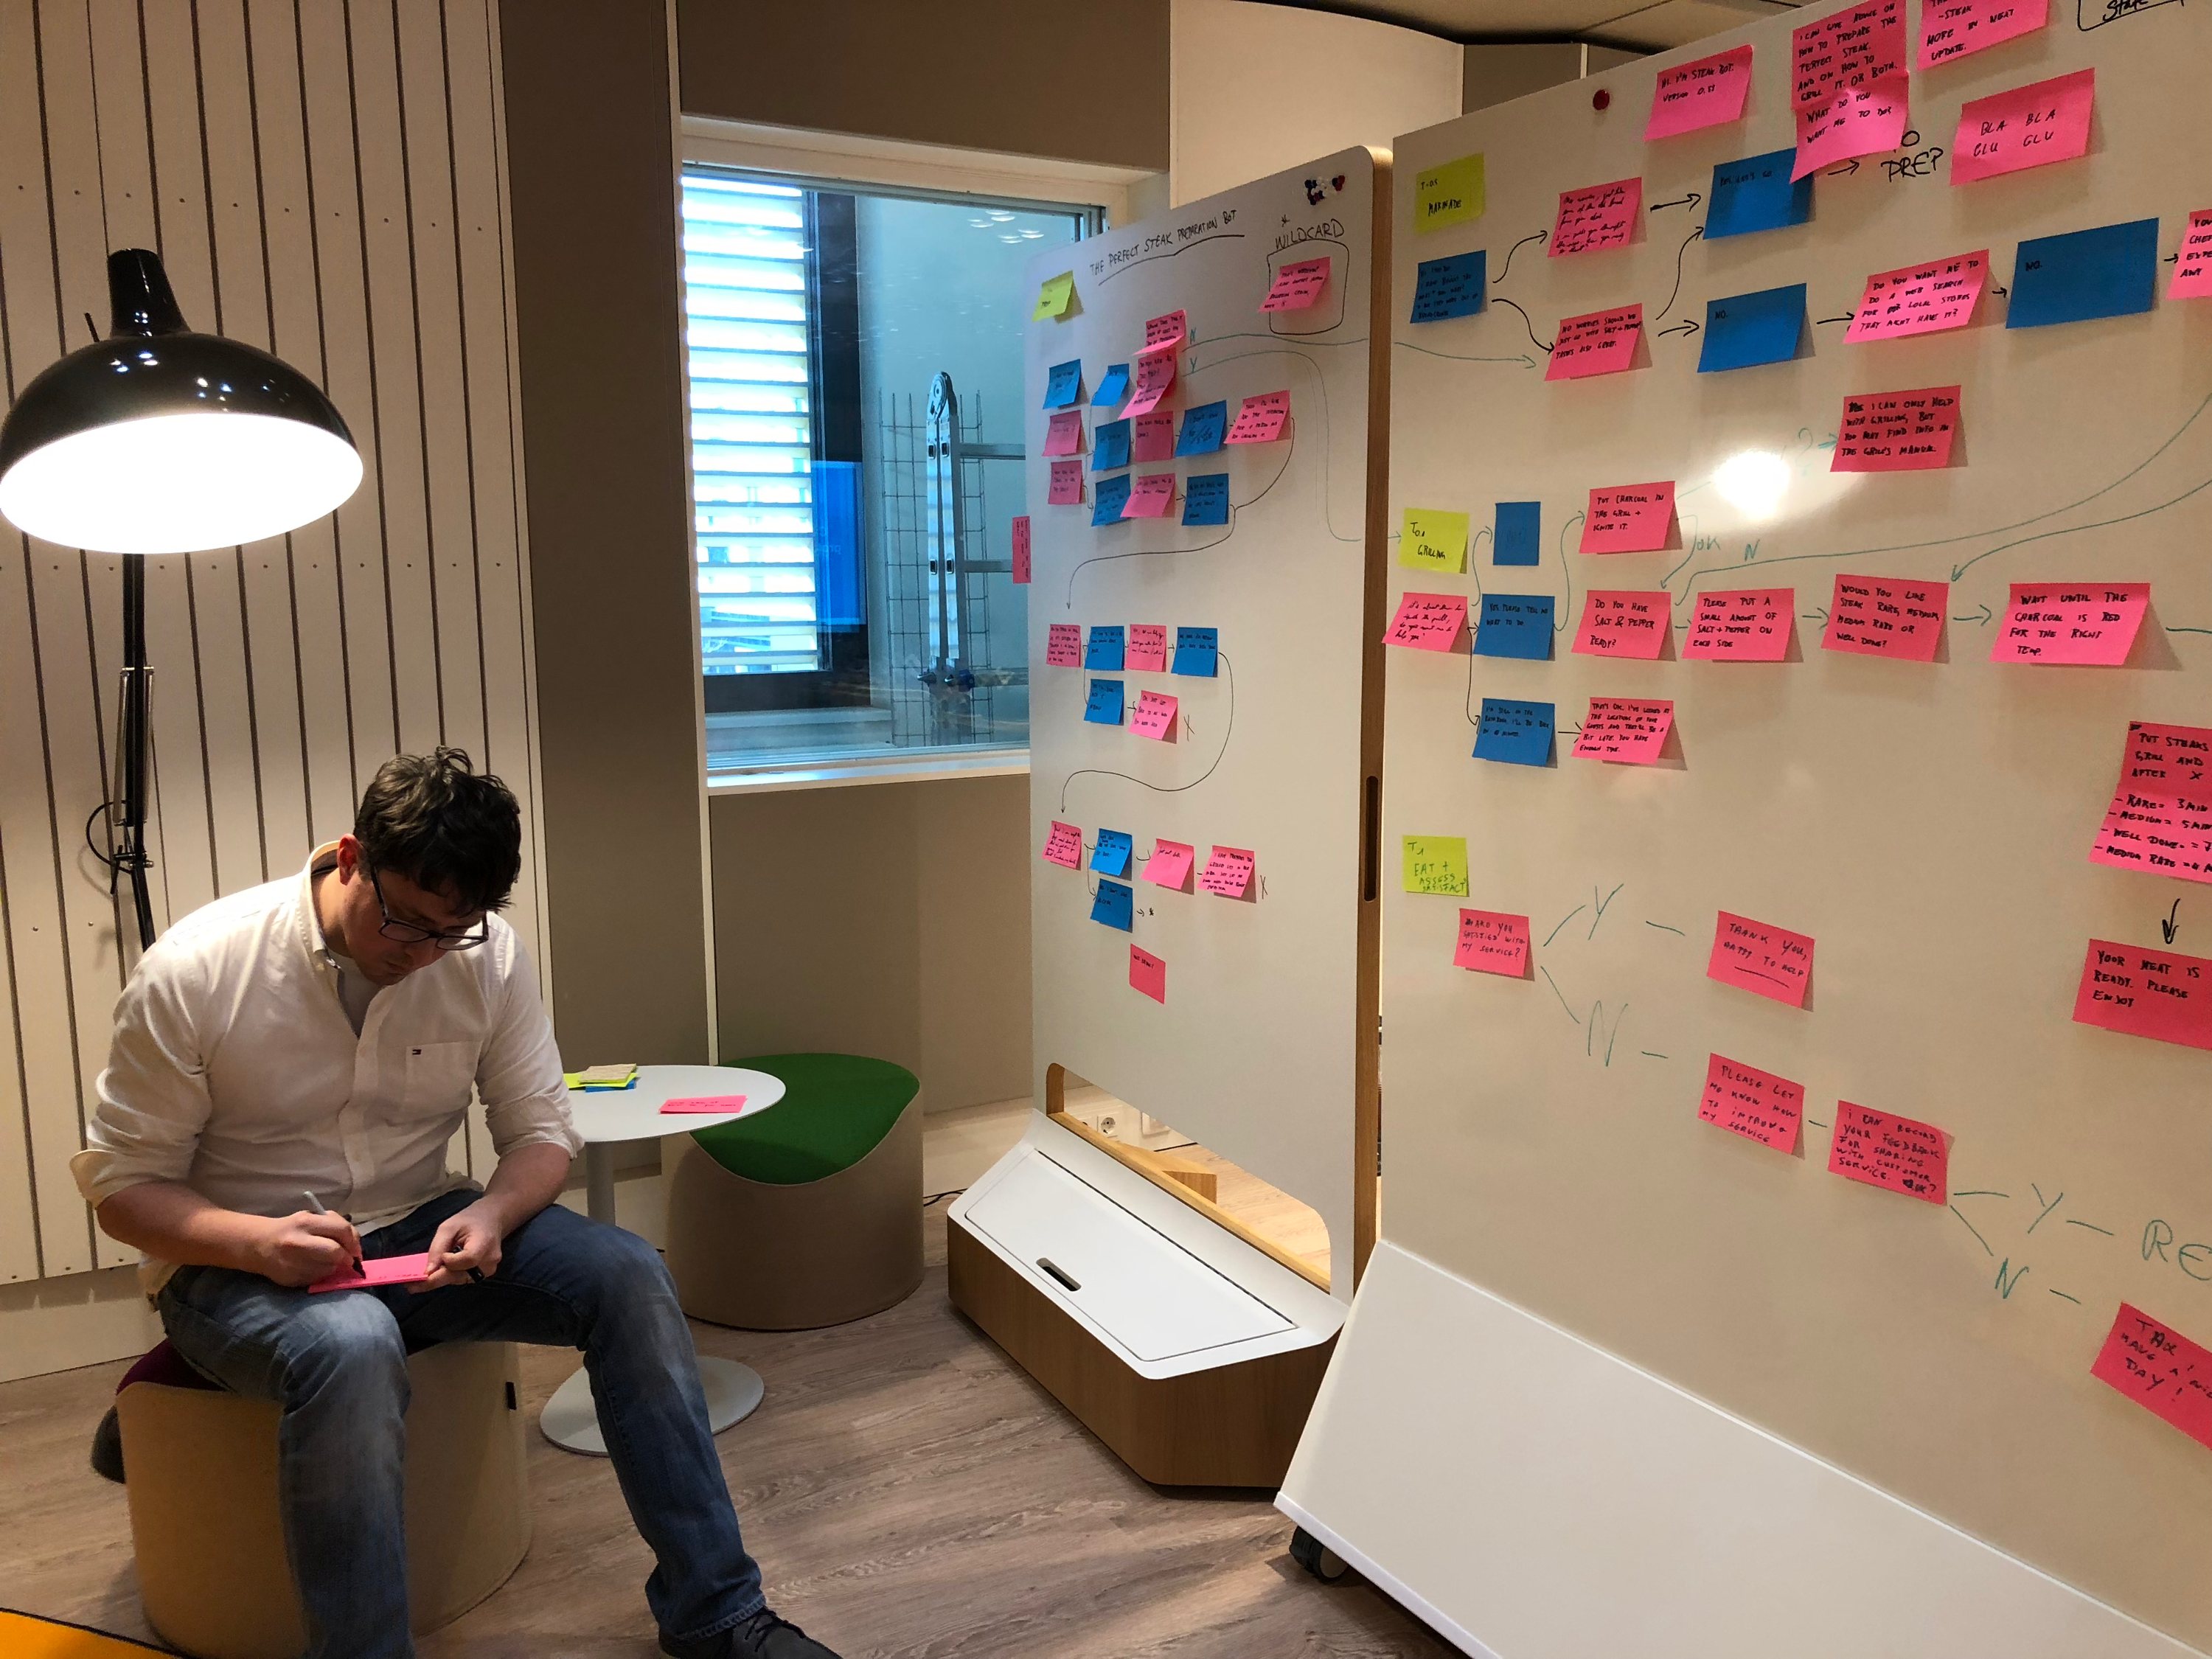 A person is noting down phrases on sticky notes in front of a huge whiteboard